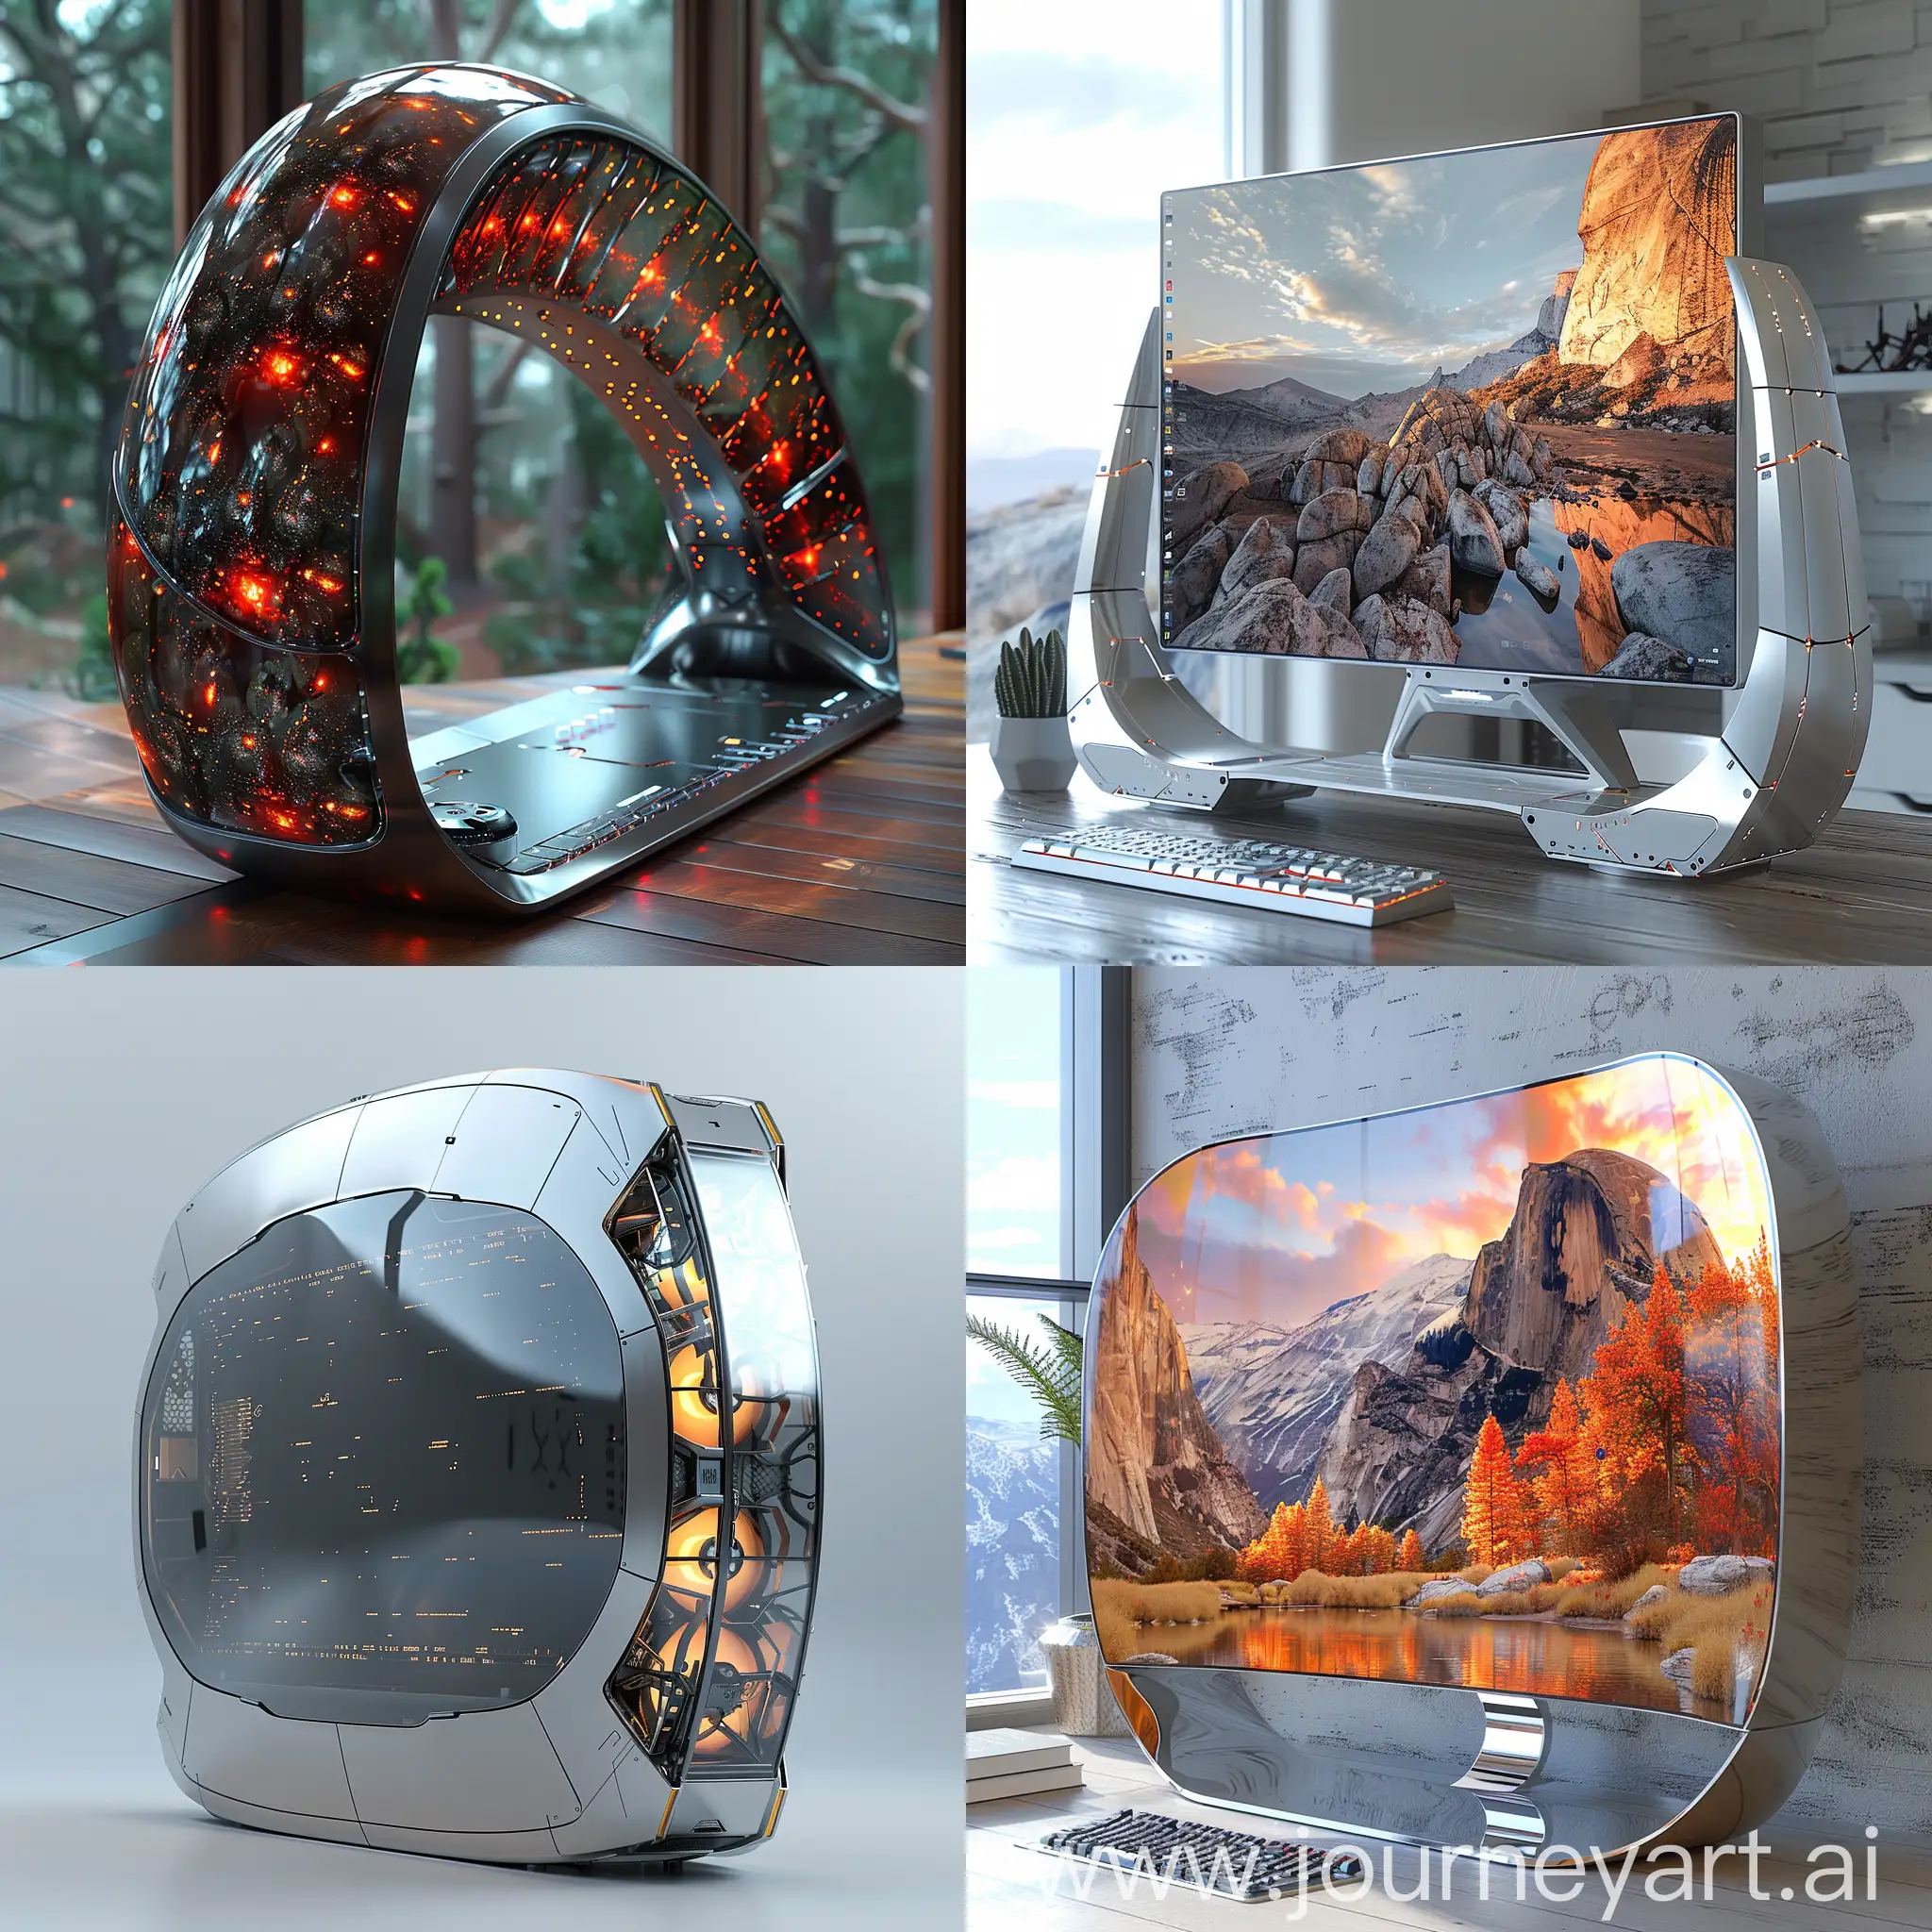 Futuristic-Stainless-Steel-PC-Monitor-with-Smart-Materials